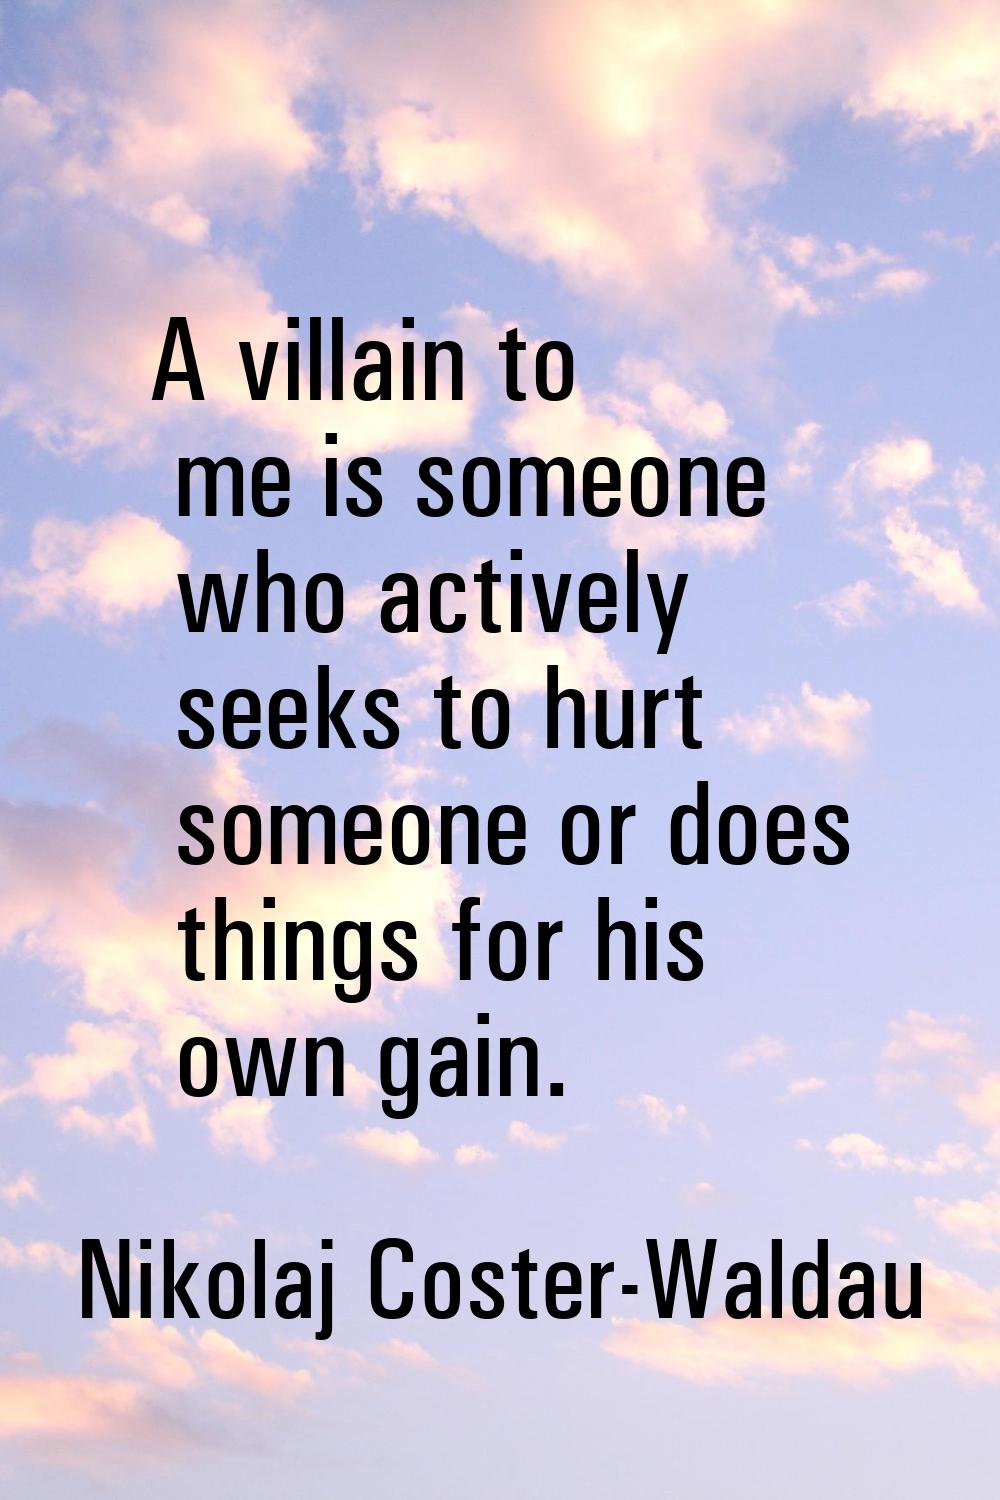 A villain to me is someone who actively seeks to hurt someone or does things for his own gain.